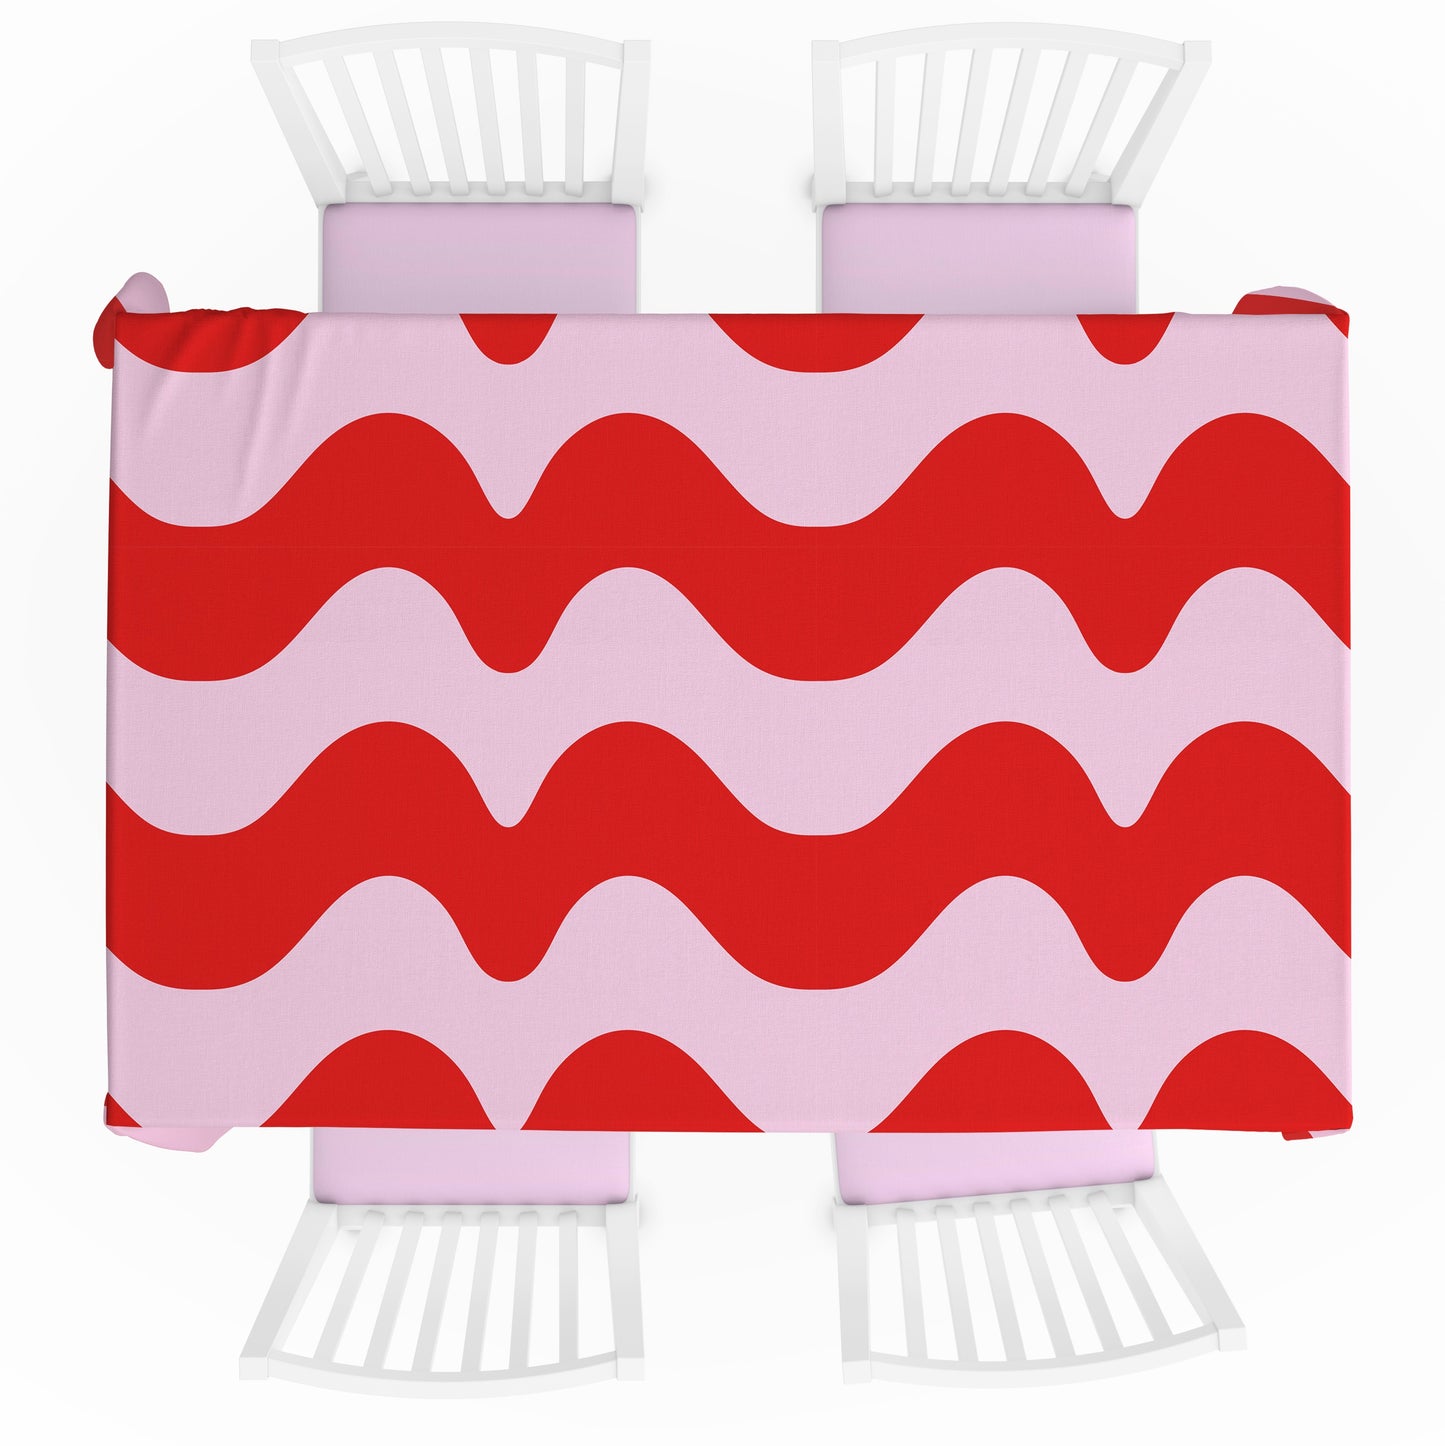 Wavy tablecloth in pink and red colours